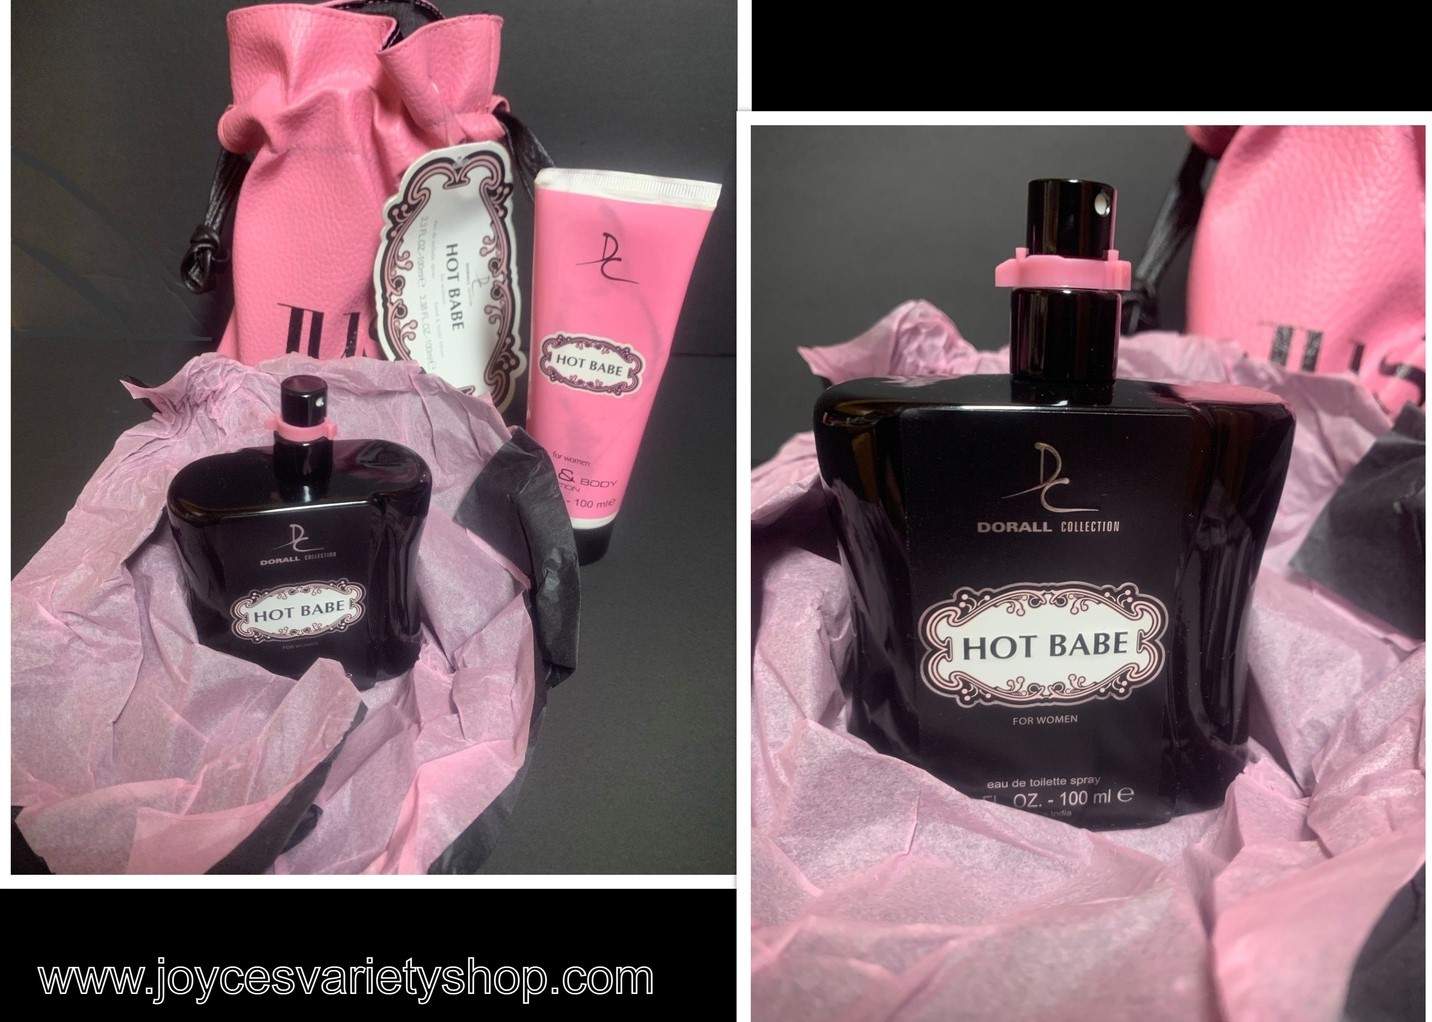 Dorall Collection Hot Babe Scented Perfume Spray & Body Lotion Pink Leather Bag